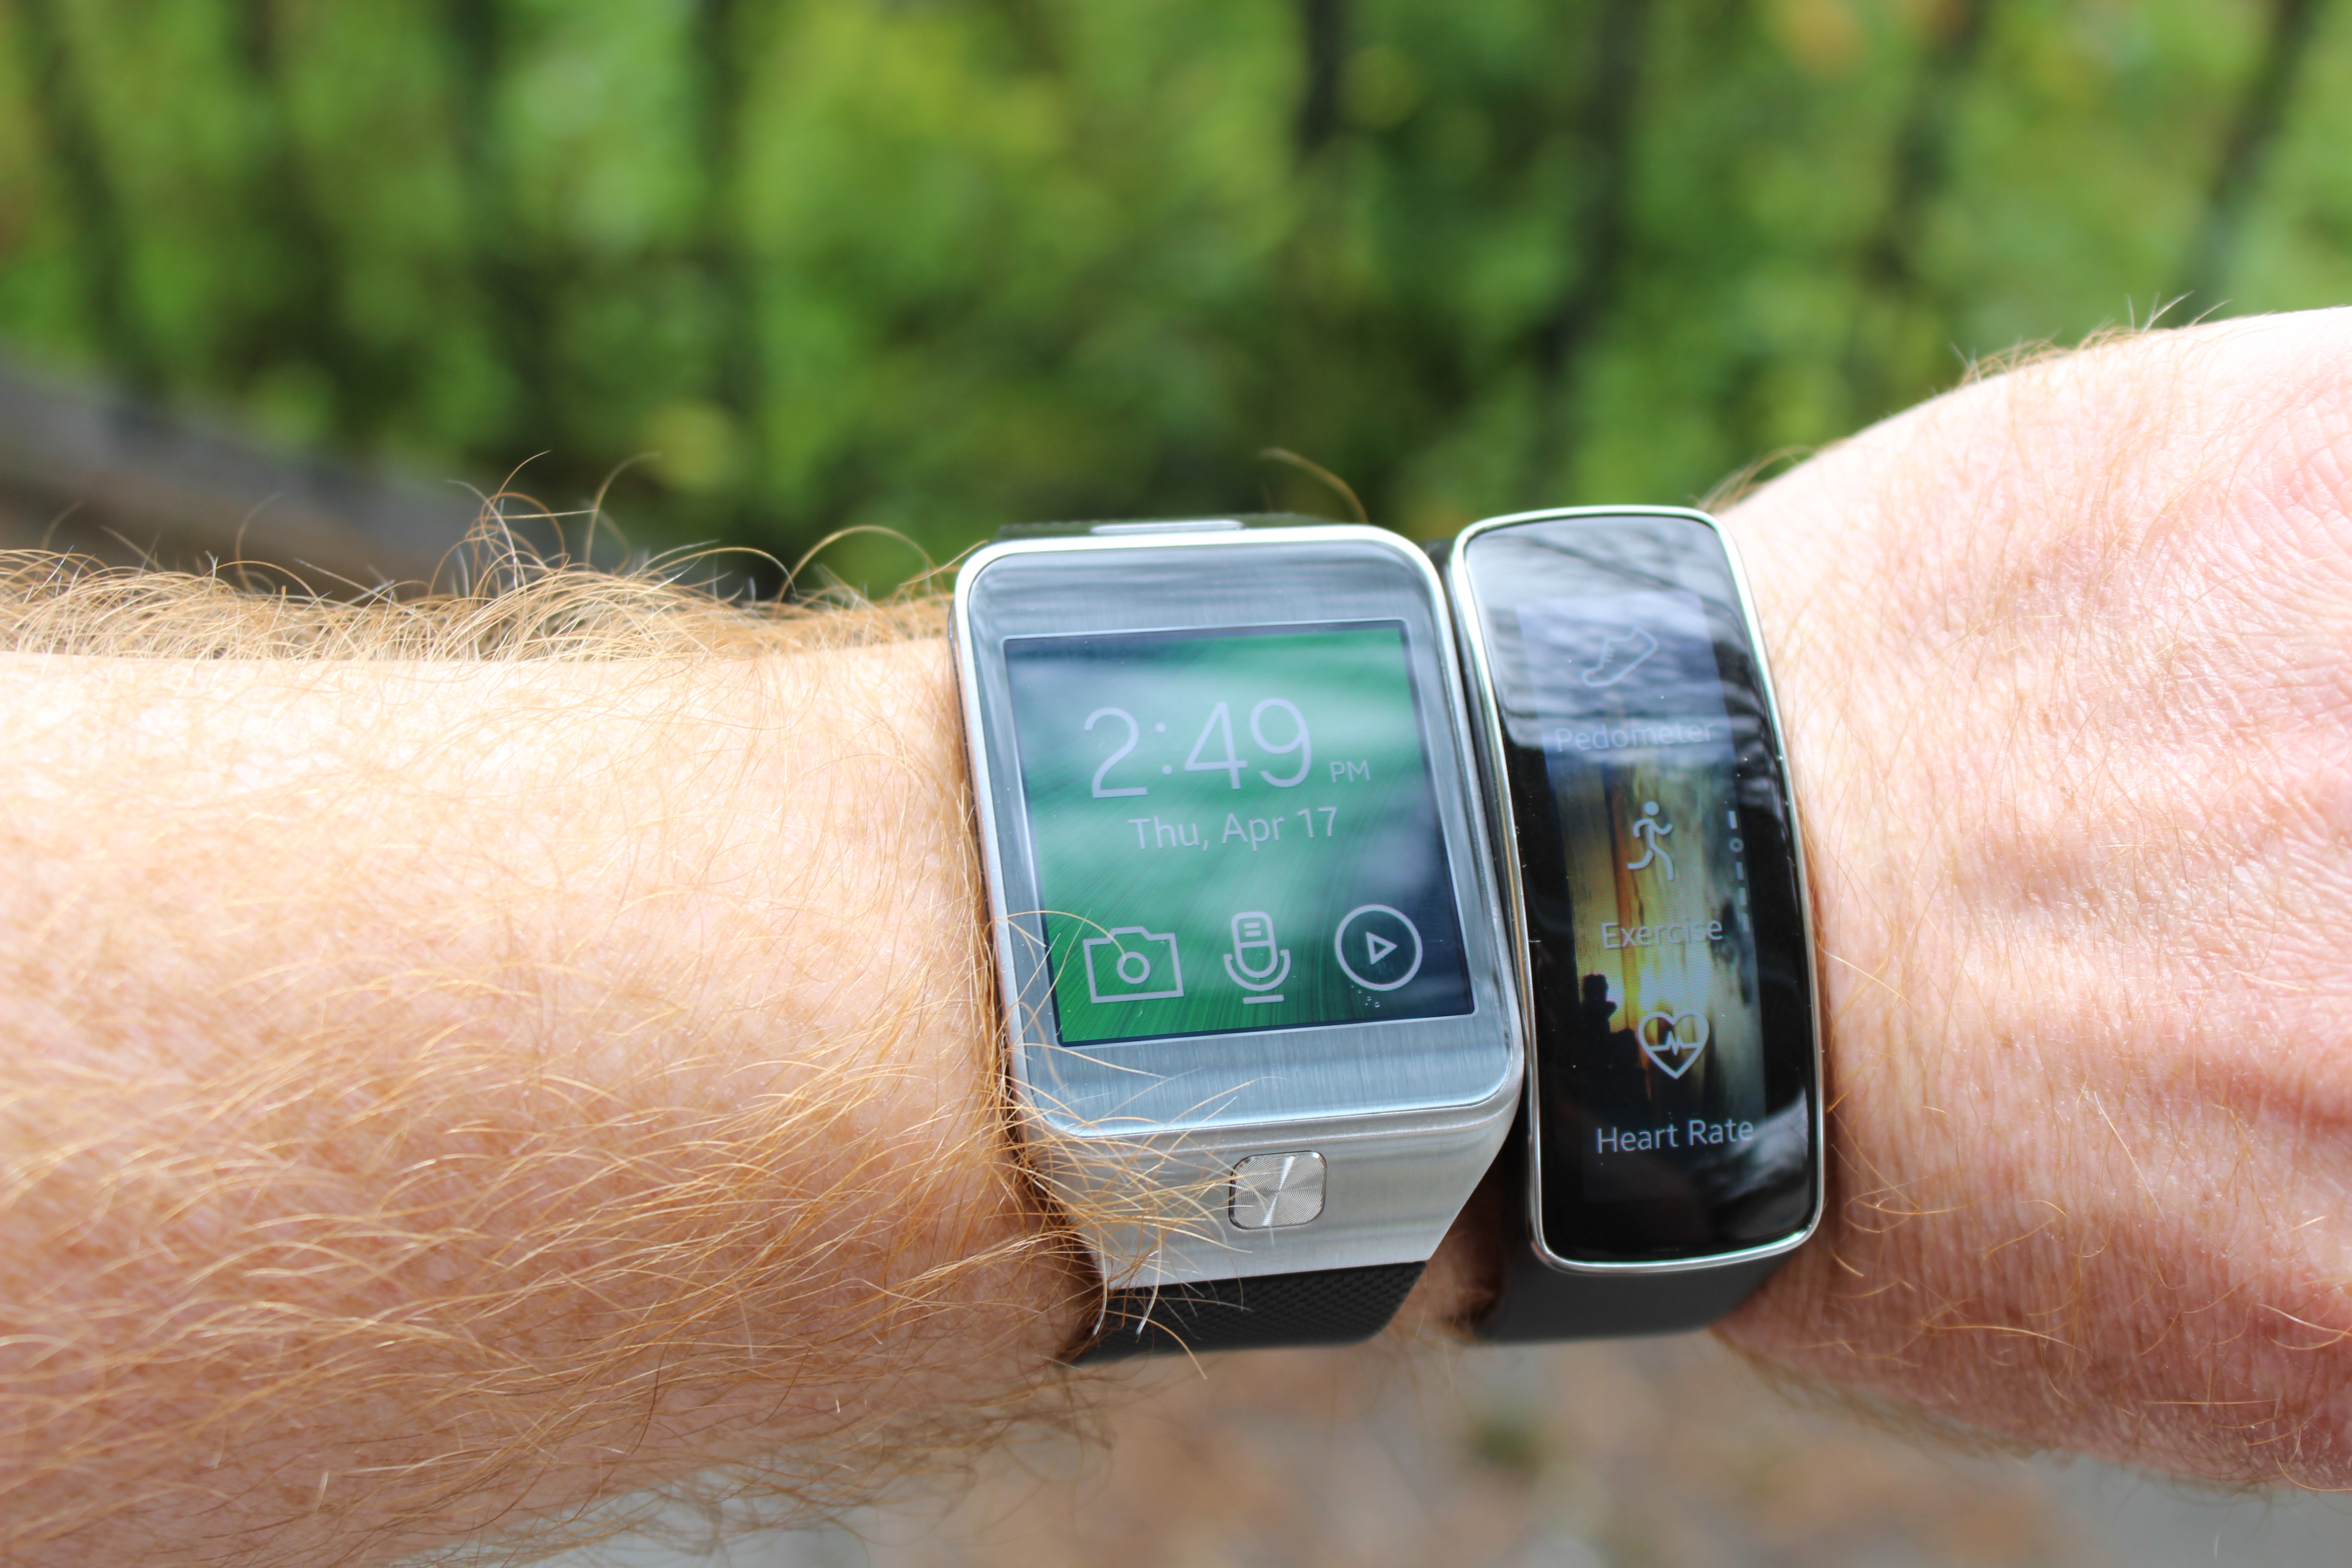 Gear 2 and Gear Fit 